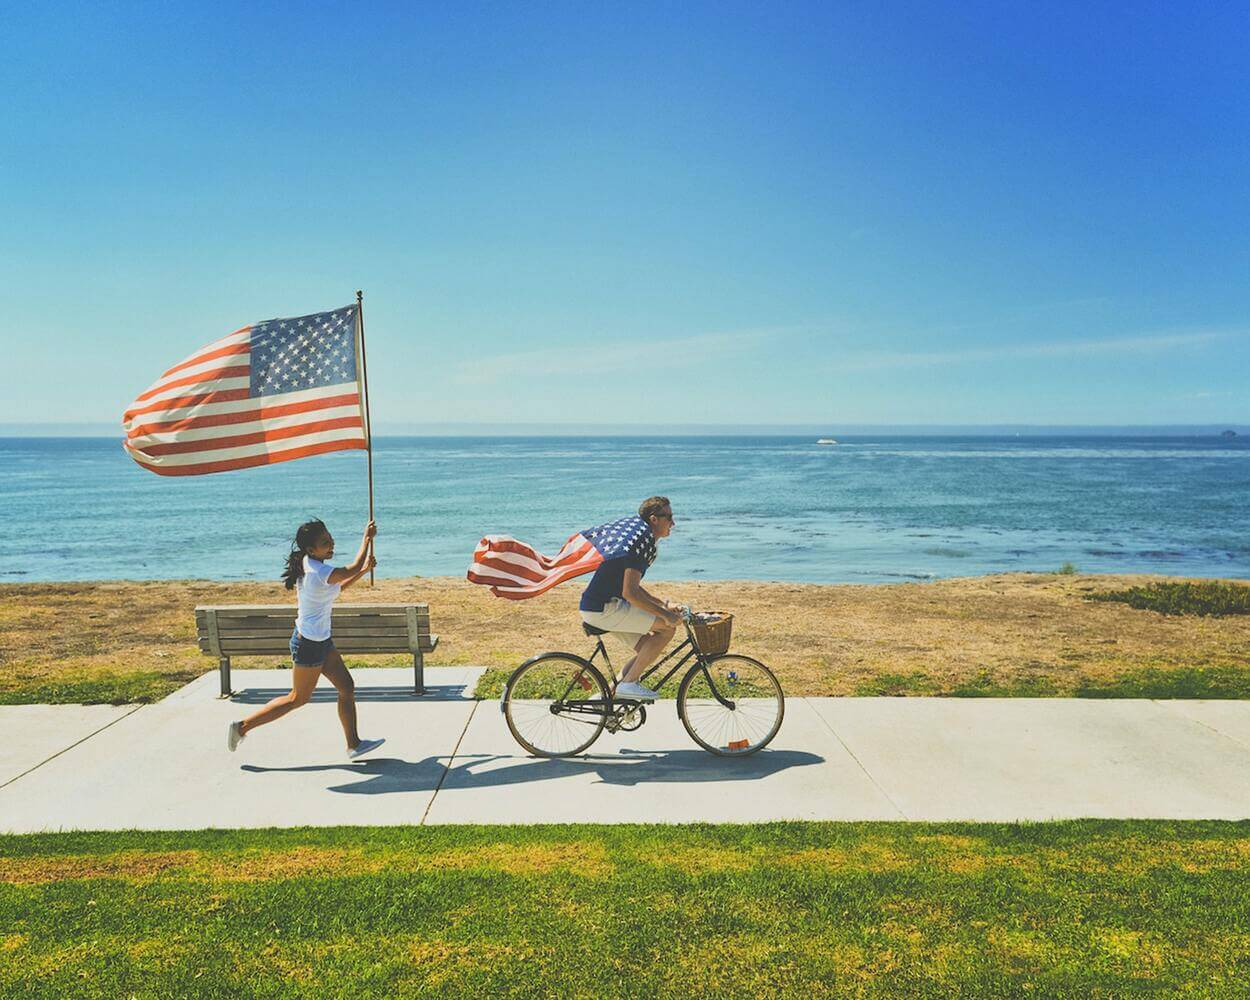 A boy riding his bicycle with an American flag on his shoulders. A girl holding an American flag while running.